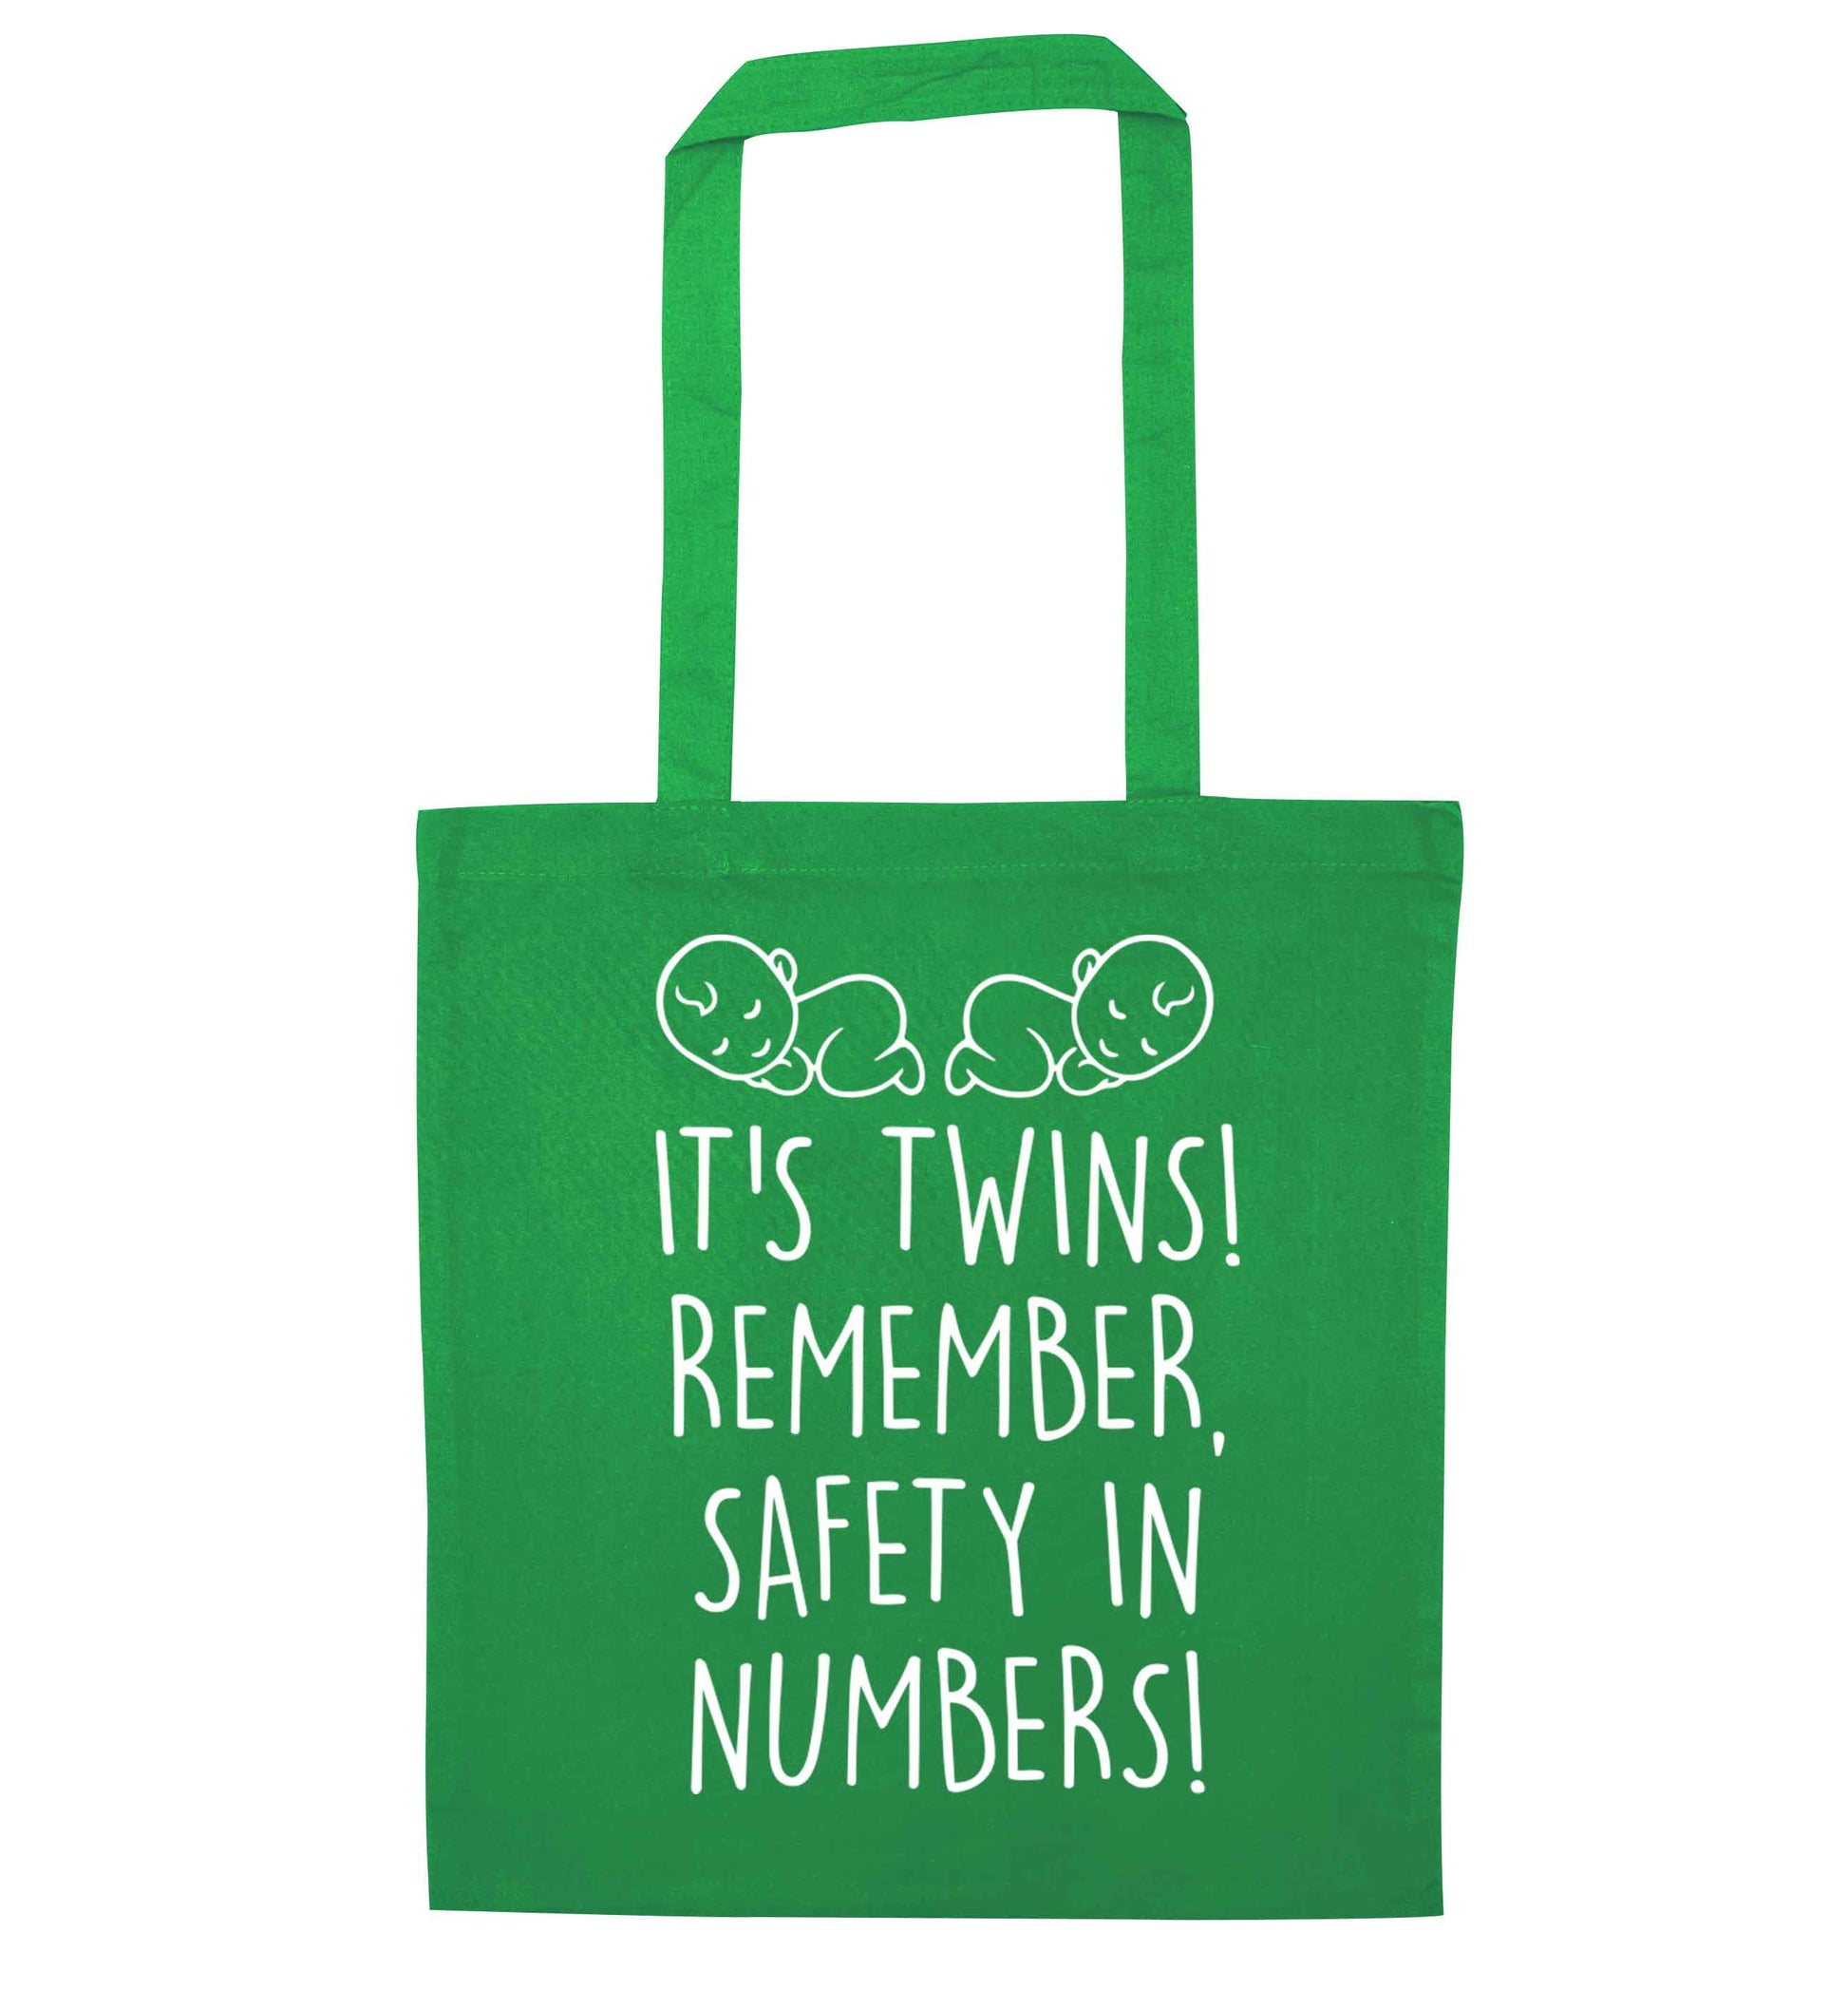 It's twins! Remember safety in numbers! green tote bag